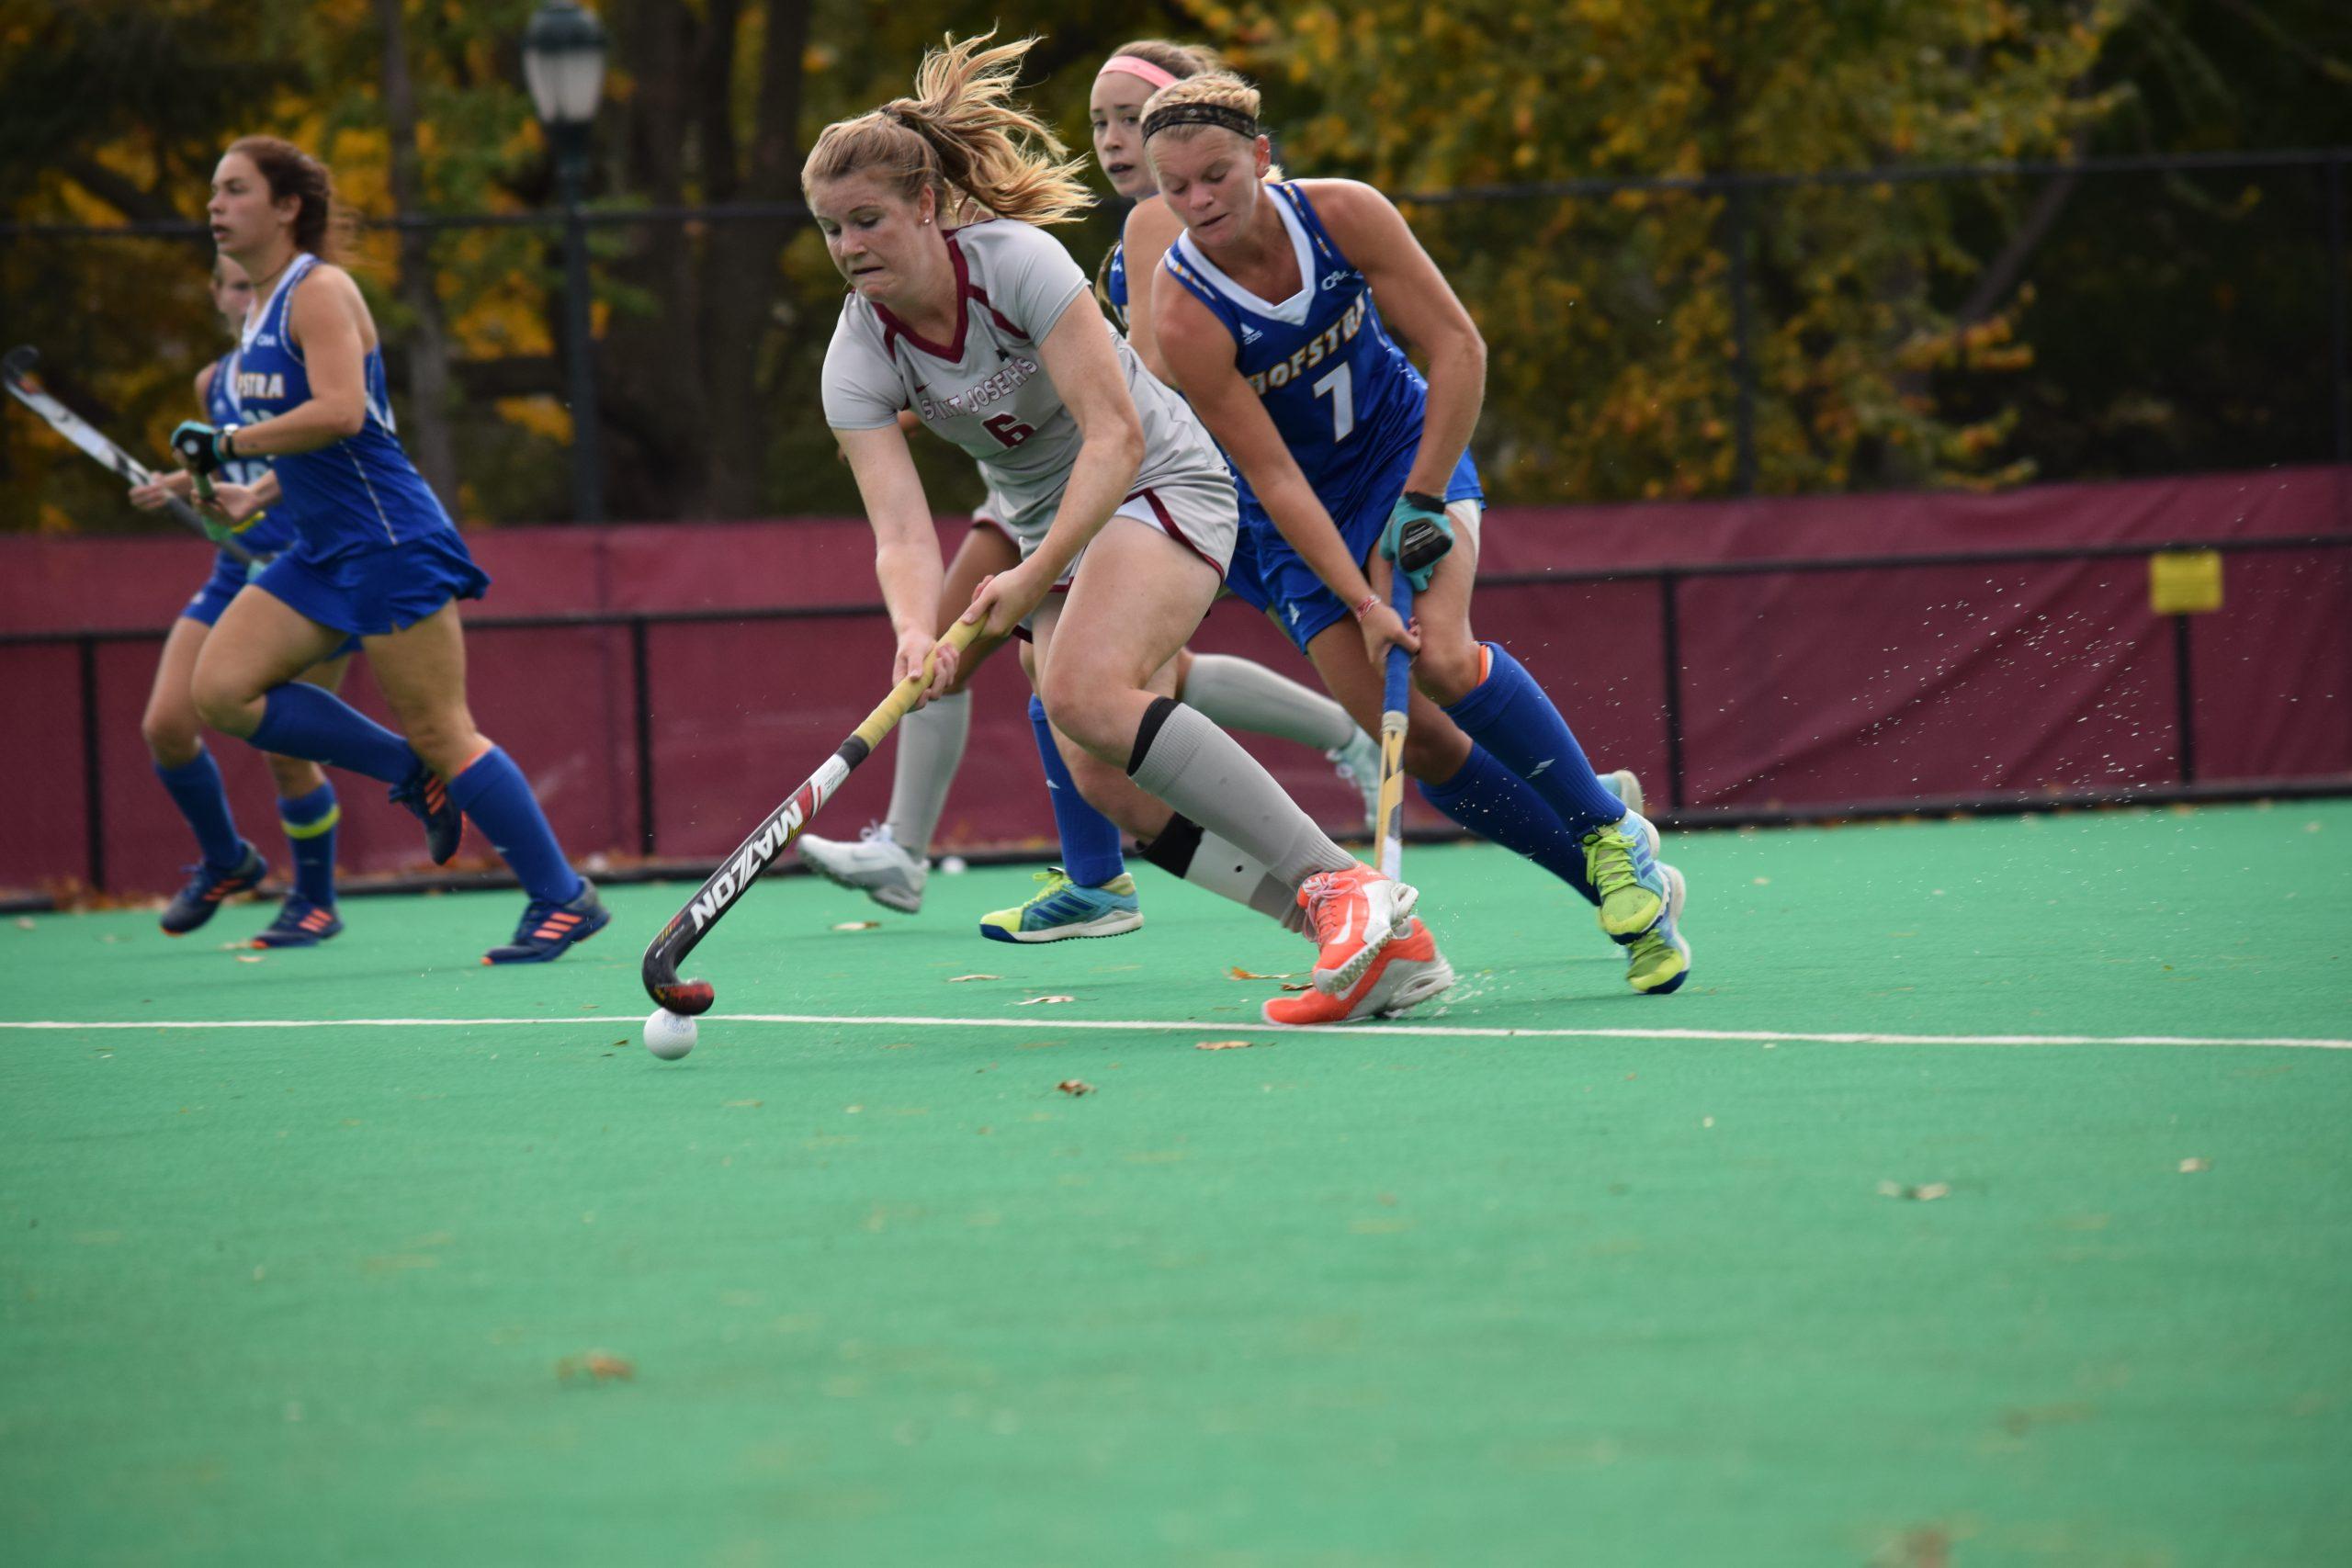 Sophomore Anna Willocks drives toward the goal on Oct. 23 (Photo by Christy Selagy, M.A., '17).